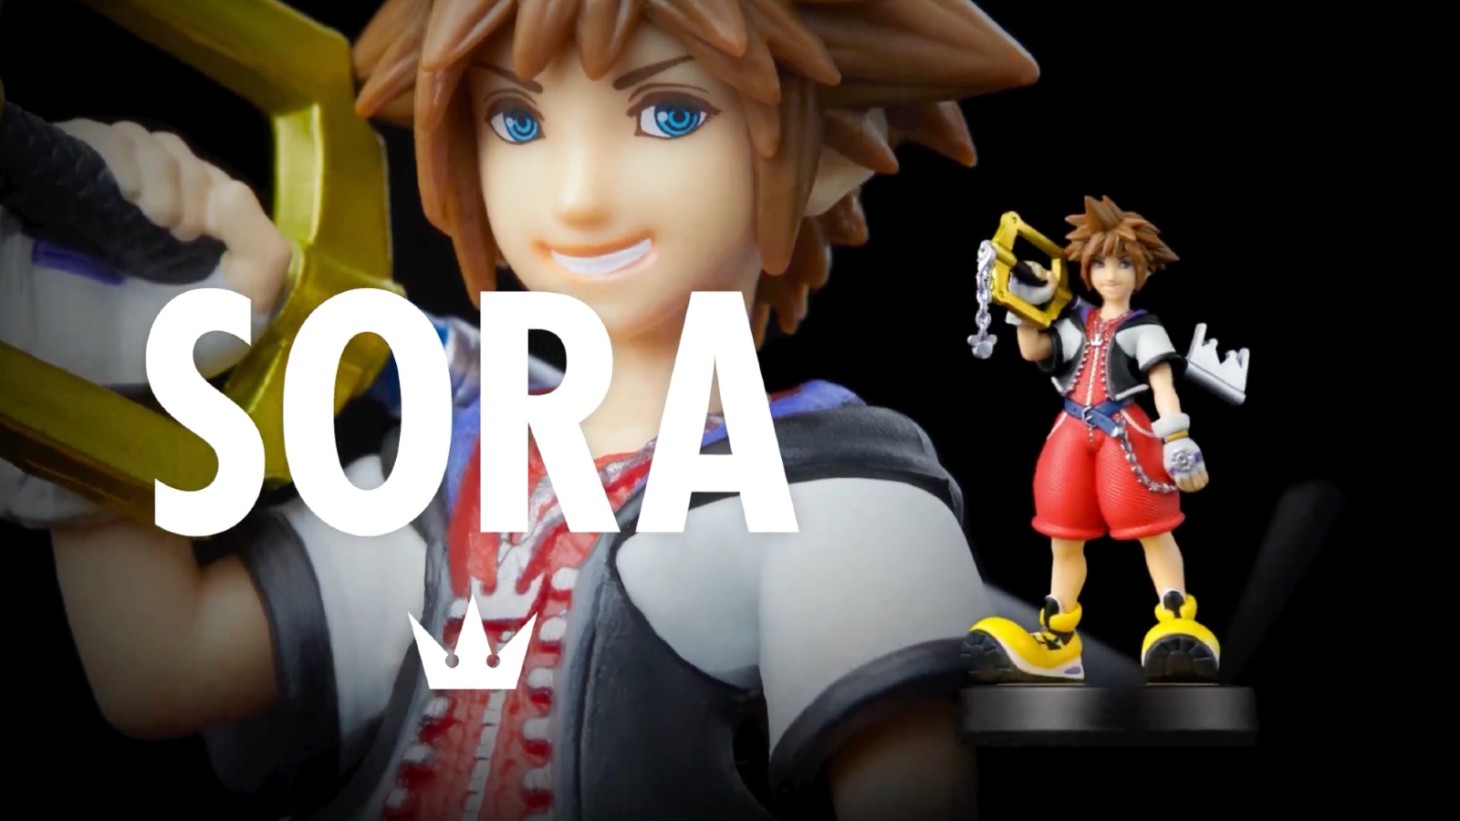 Sora Amiibo for Super Smash Bros. Ultimate 2 out of 2 image gallery